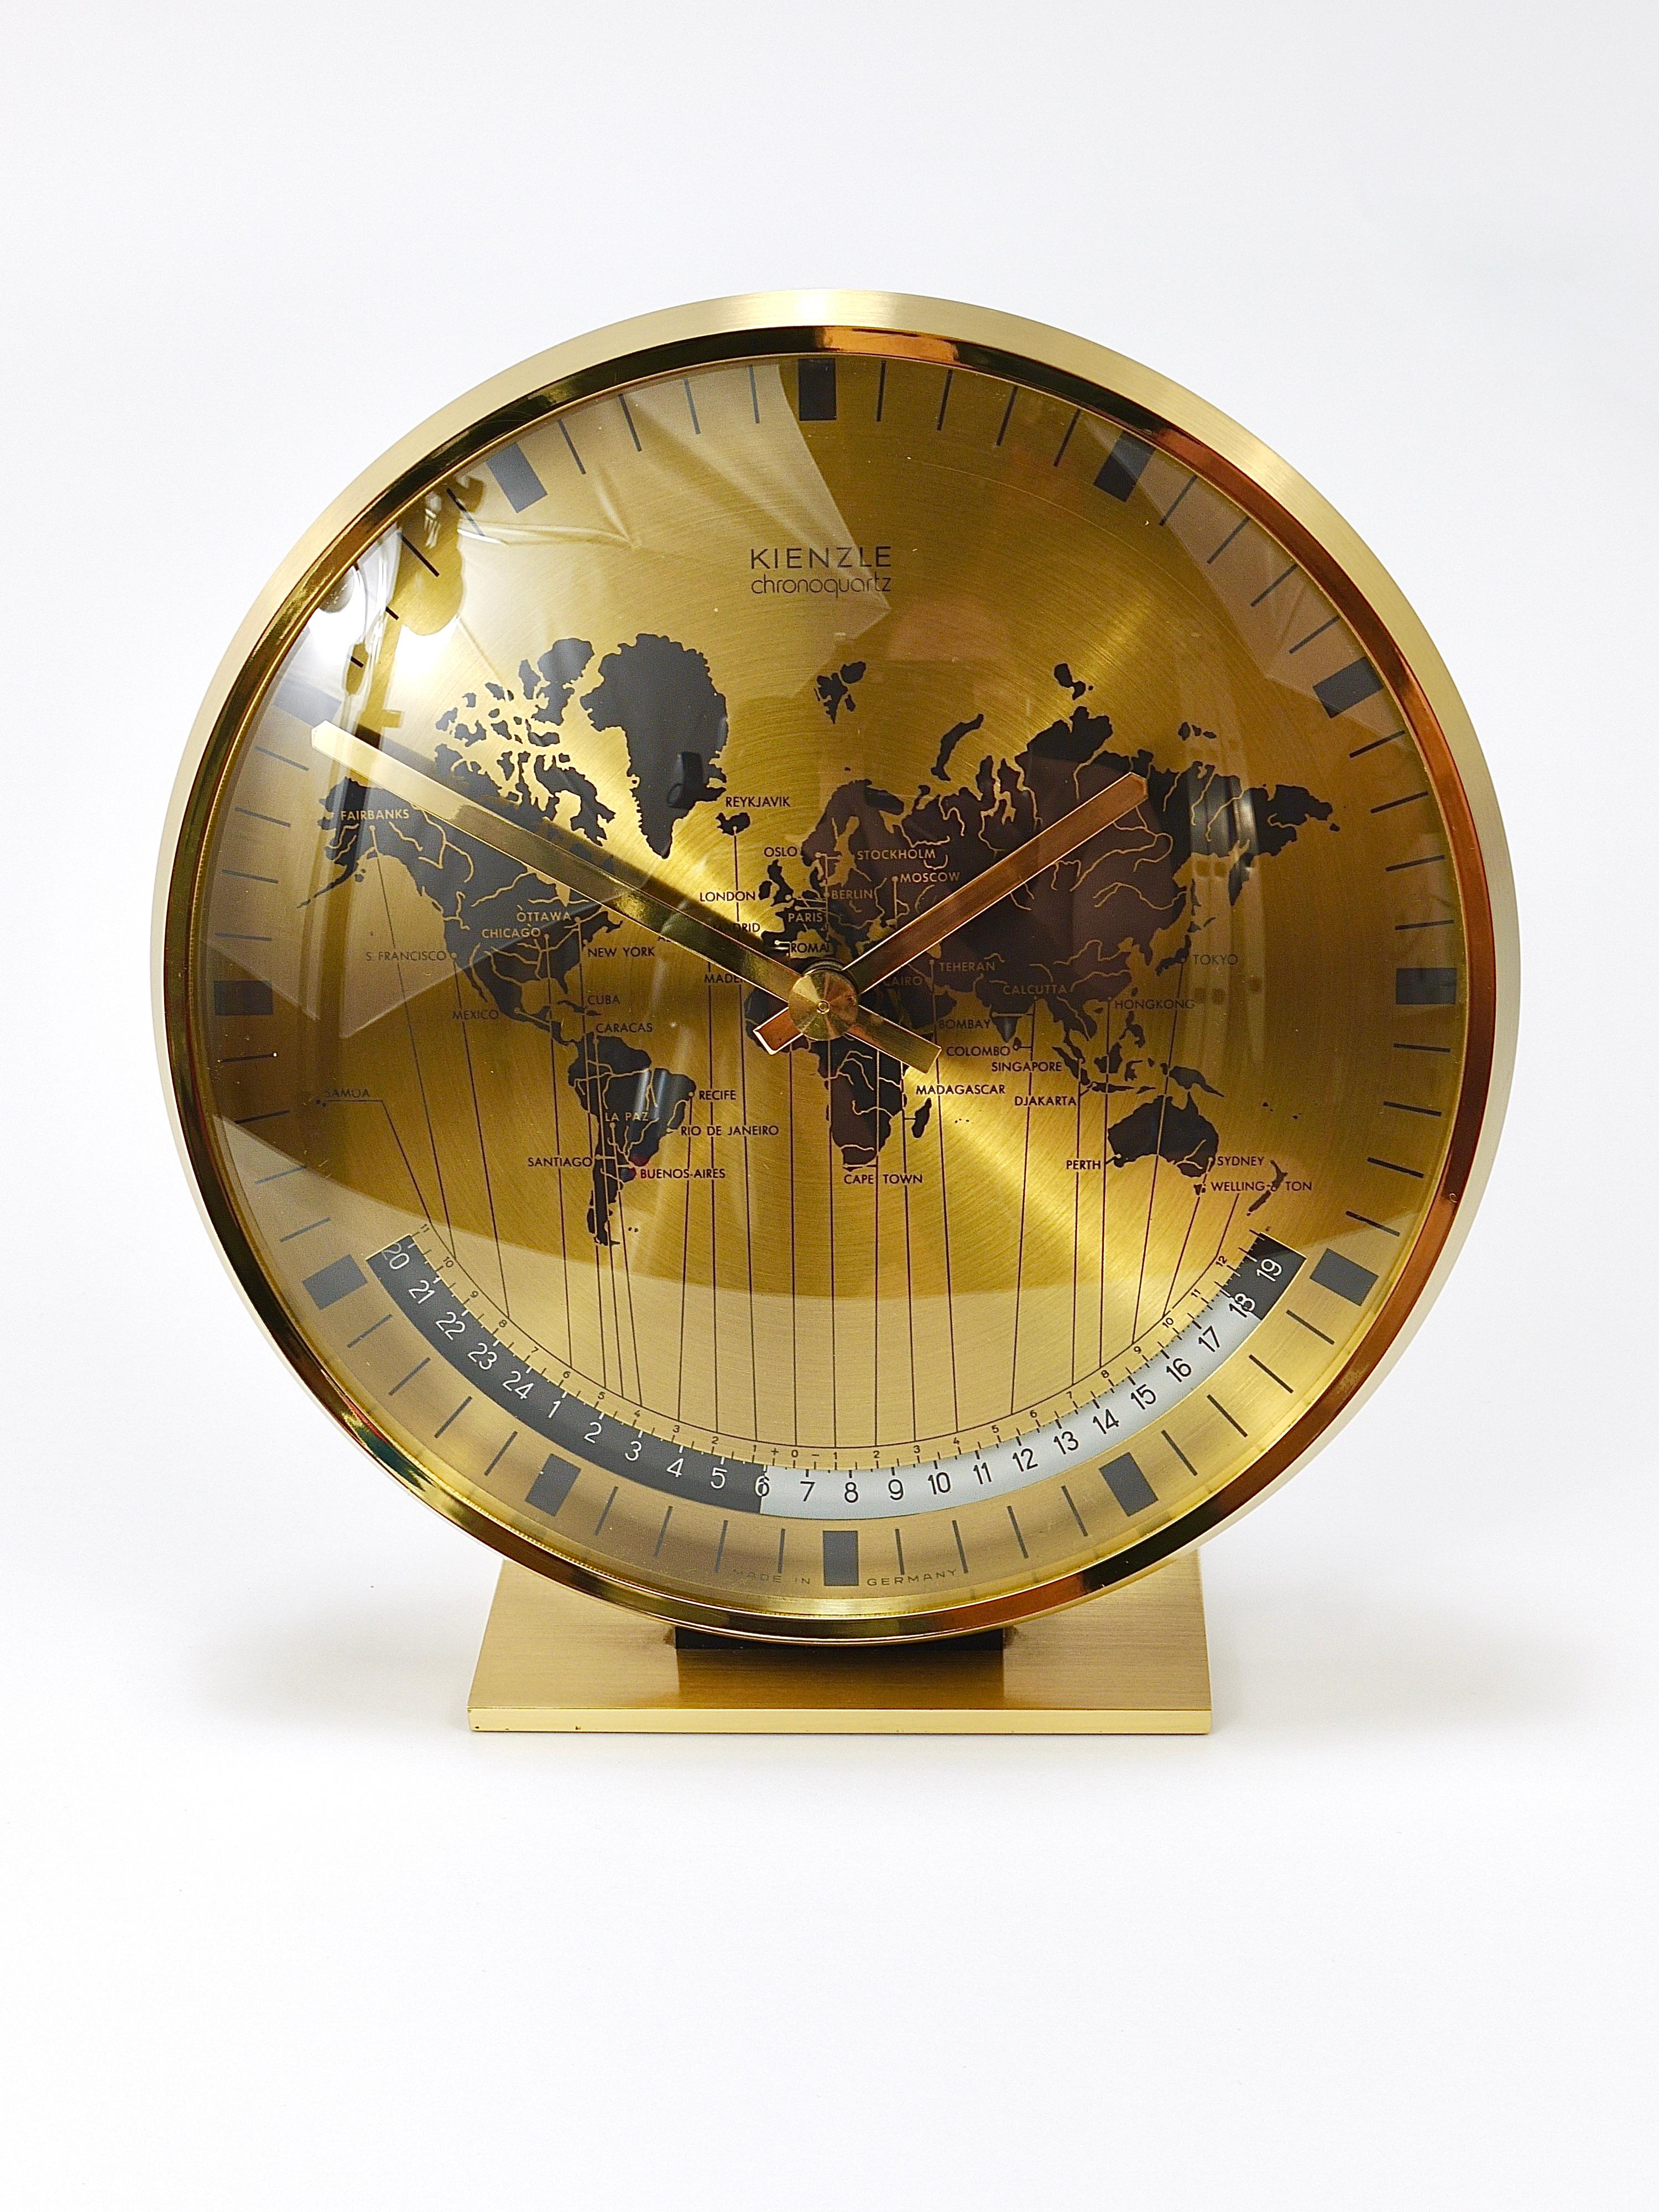 Kienzle GMT World Time Zone Brass Table Clock, Midcentury, Germany, 1960s For Sale 9